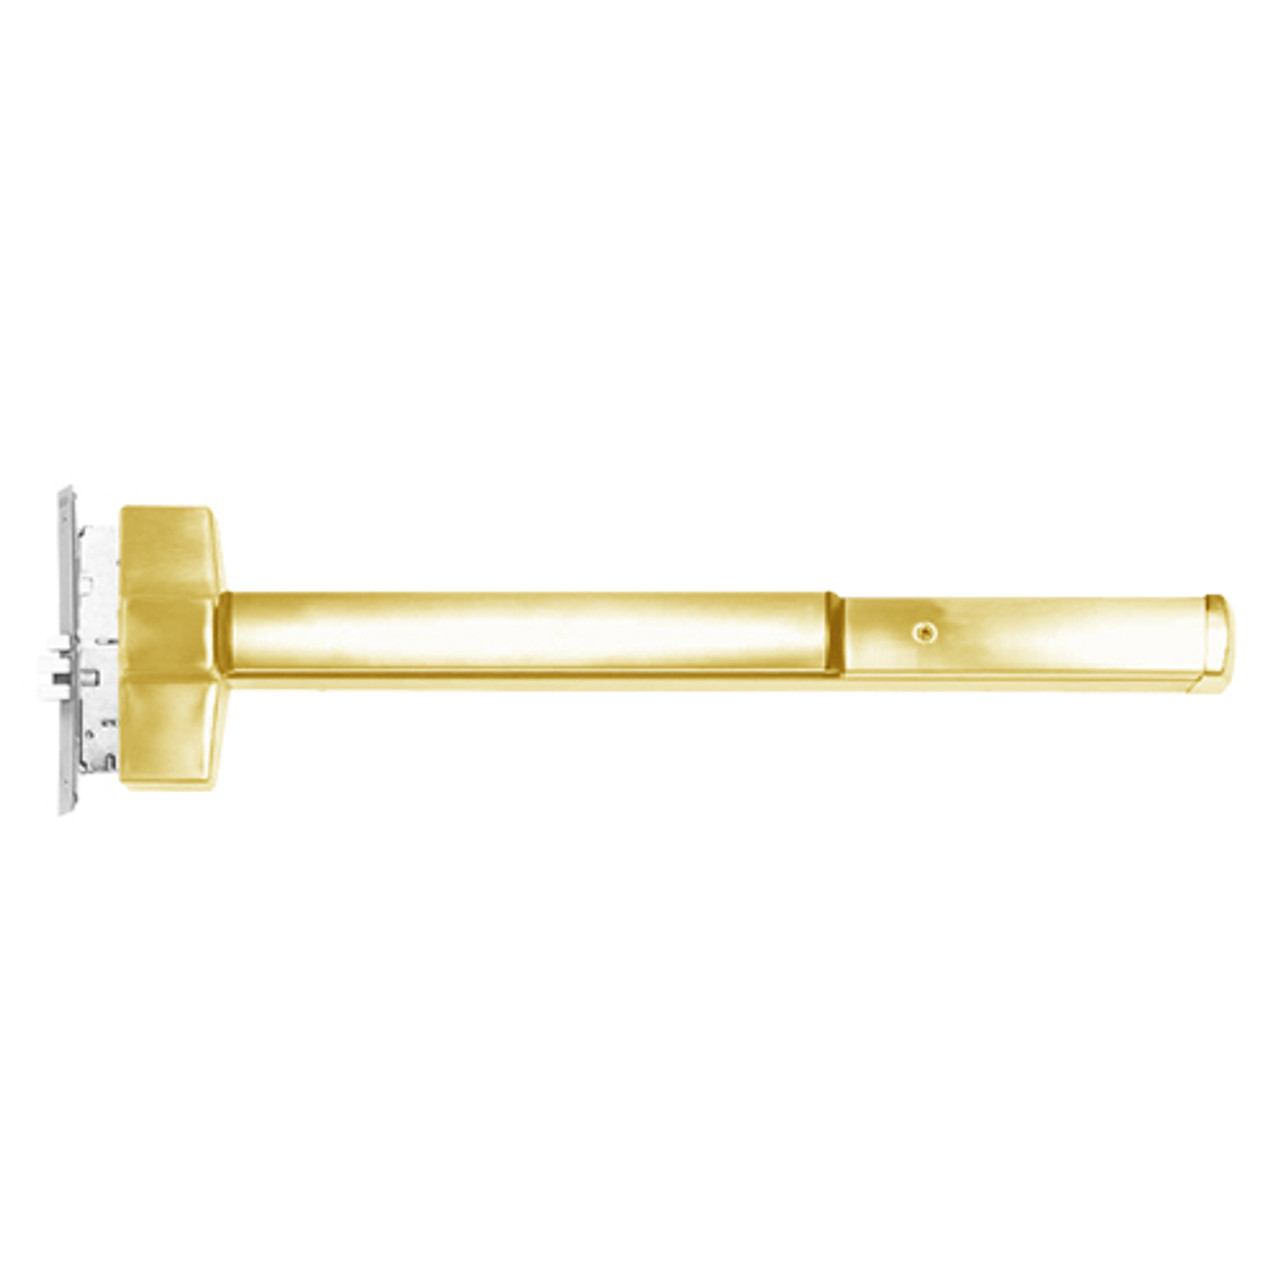 ED5600TD-605-W048-LHR Corbin ED5600 Series Non Fire Rated Mortise Exit Device with Delayed Egress in Bright Brass Finish